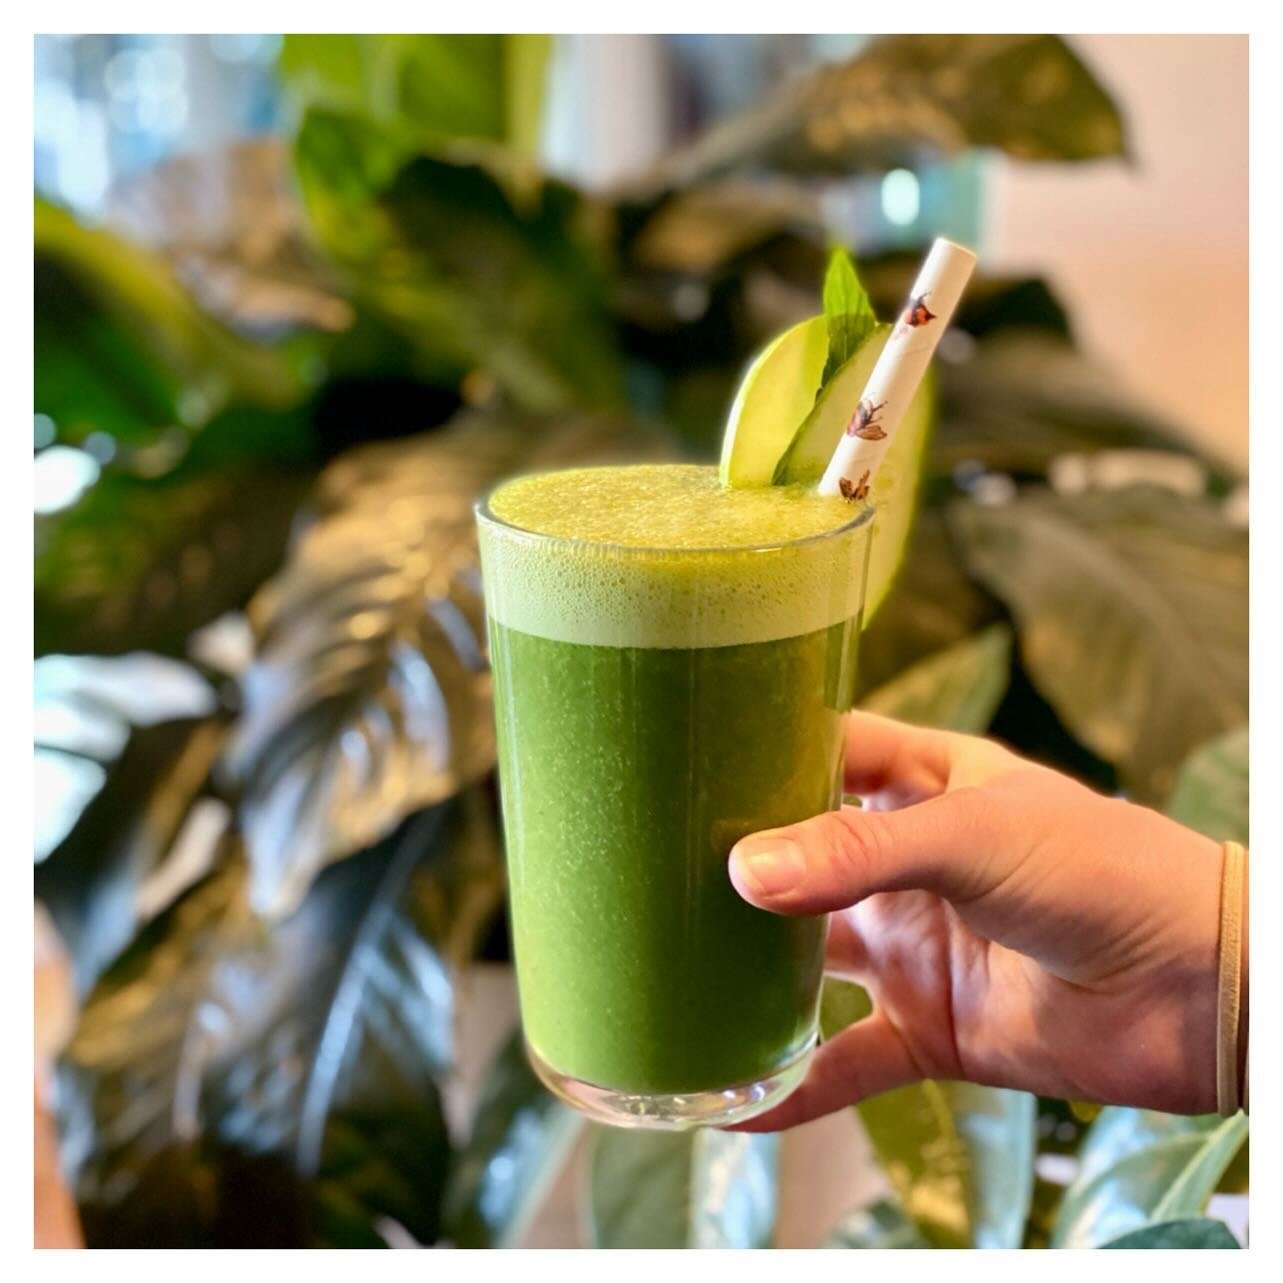 Rolling into the new week with a whole lotta green goodness ..
We call it 

The Green Machine Smoothie 
Spinach, Kale, Cucumber, Mint, Banana &amp; Fresh Apple Juice blended on ice. (Vegan)

Happy Monday 😜

#birchwoodjindabyne